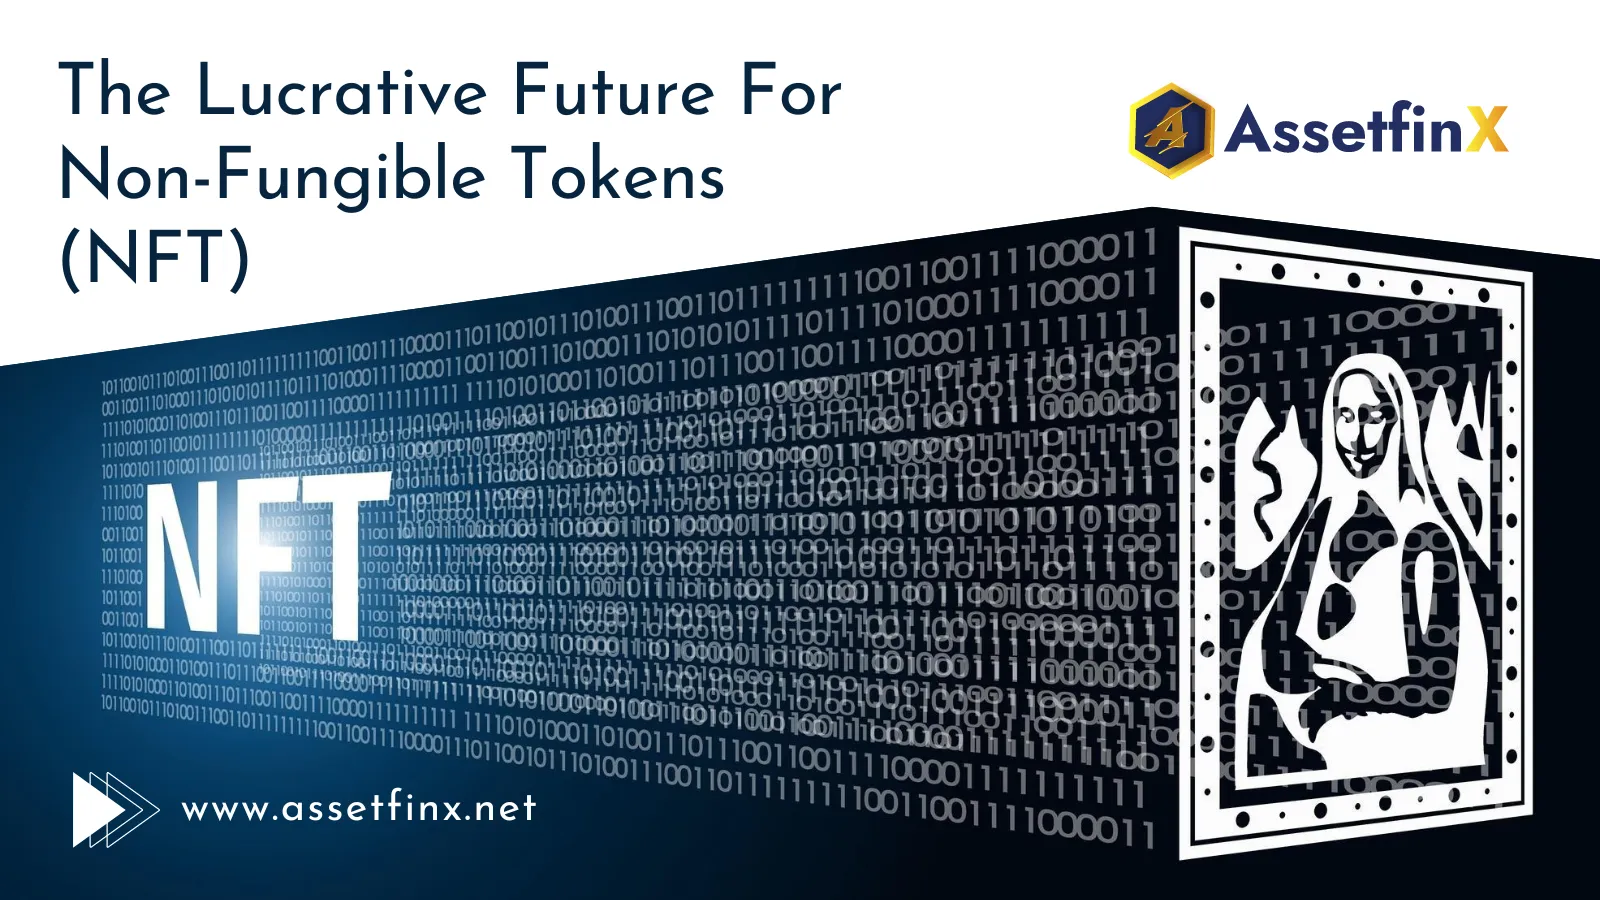 The Lucrative Future For Non-Fungible Tokens (NFT)